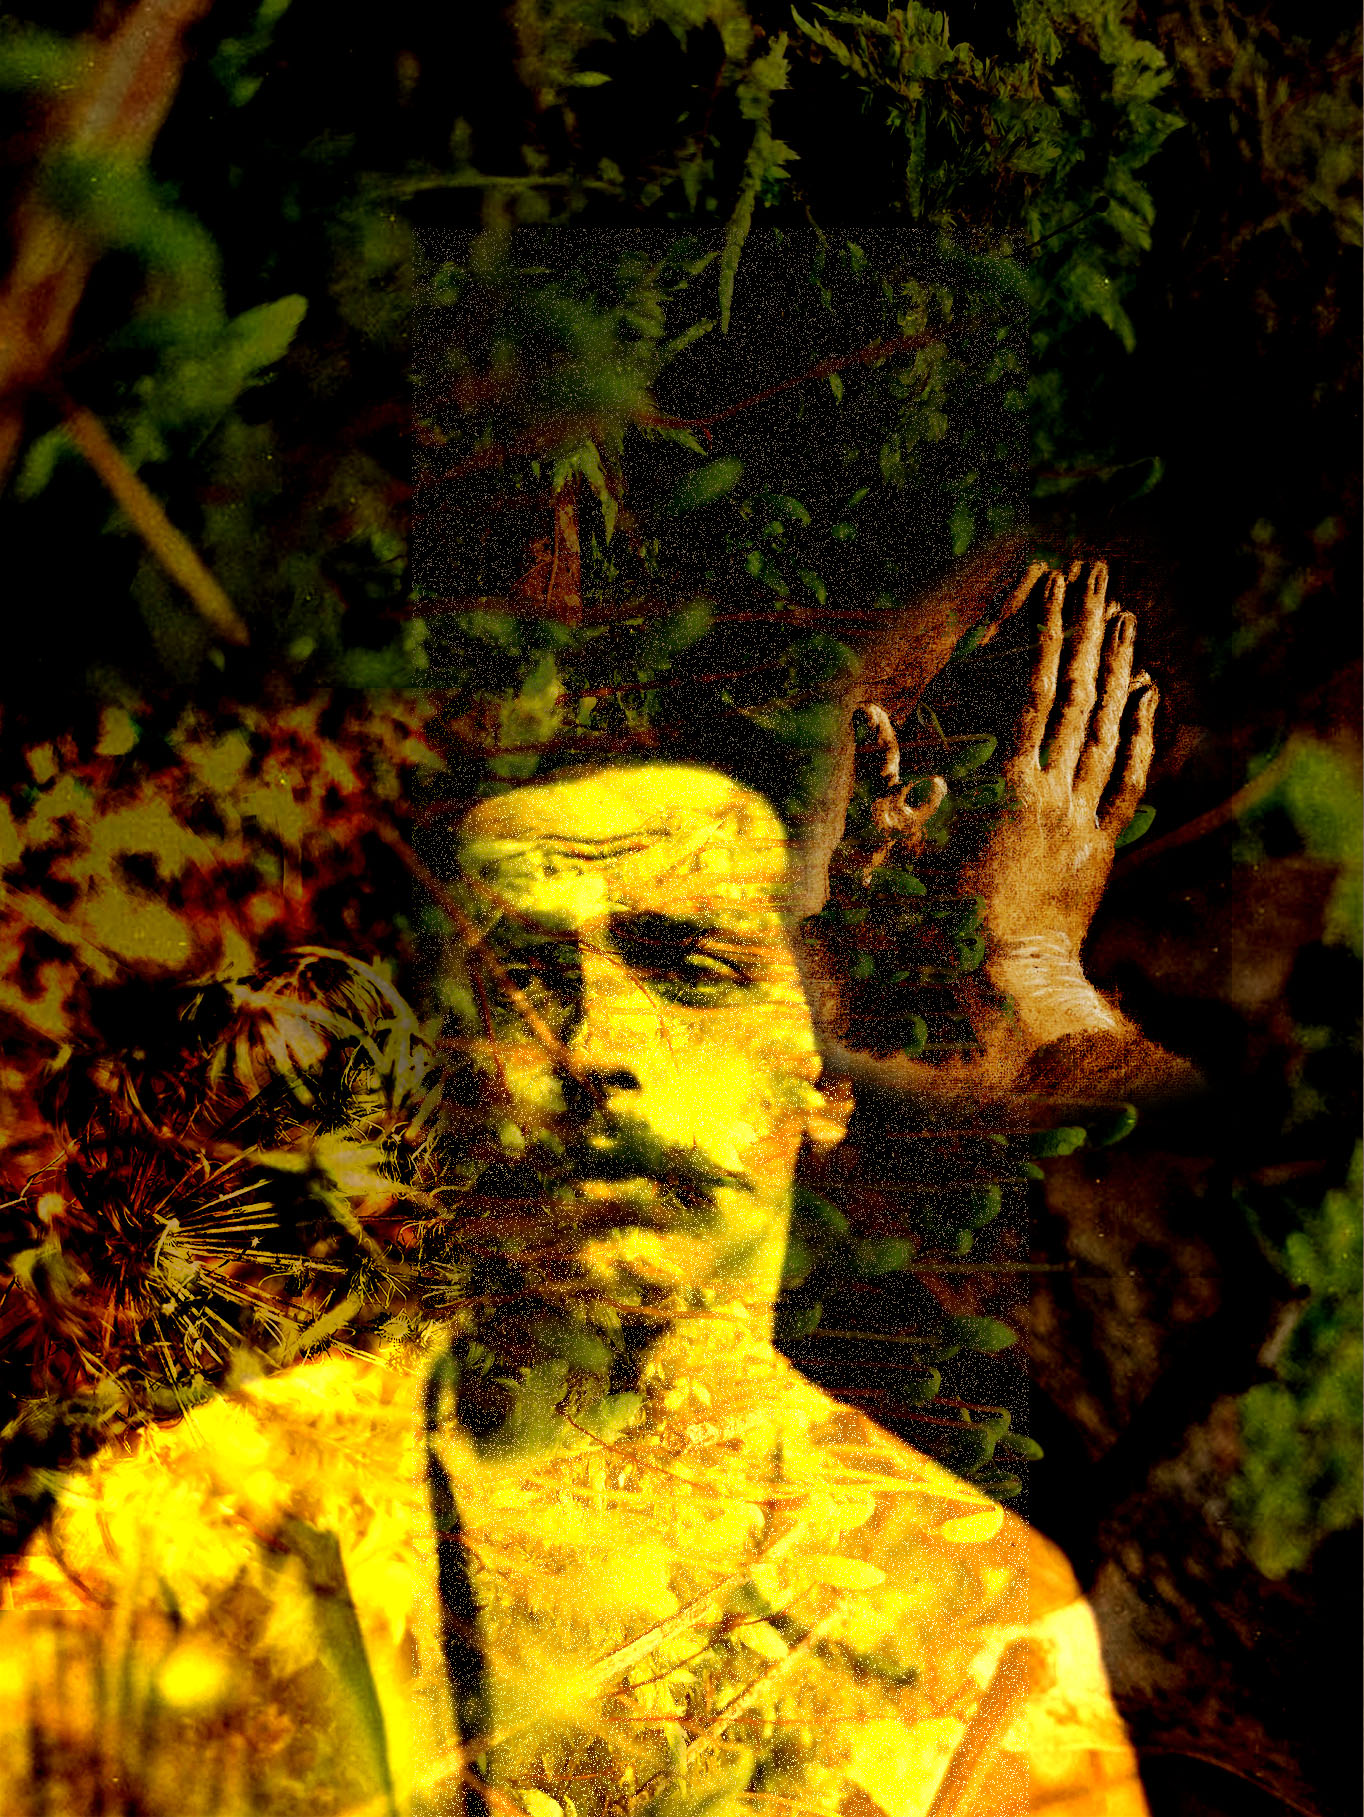 A digital collage showing a mustached man, praying hands, and a leafy background in tones of yellow.